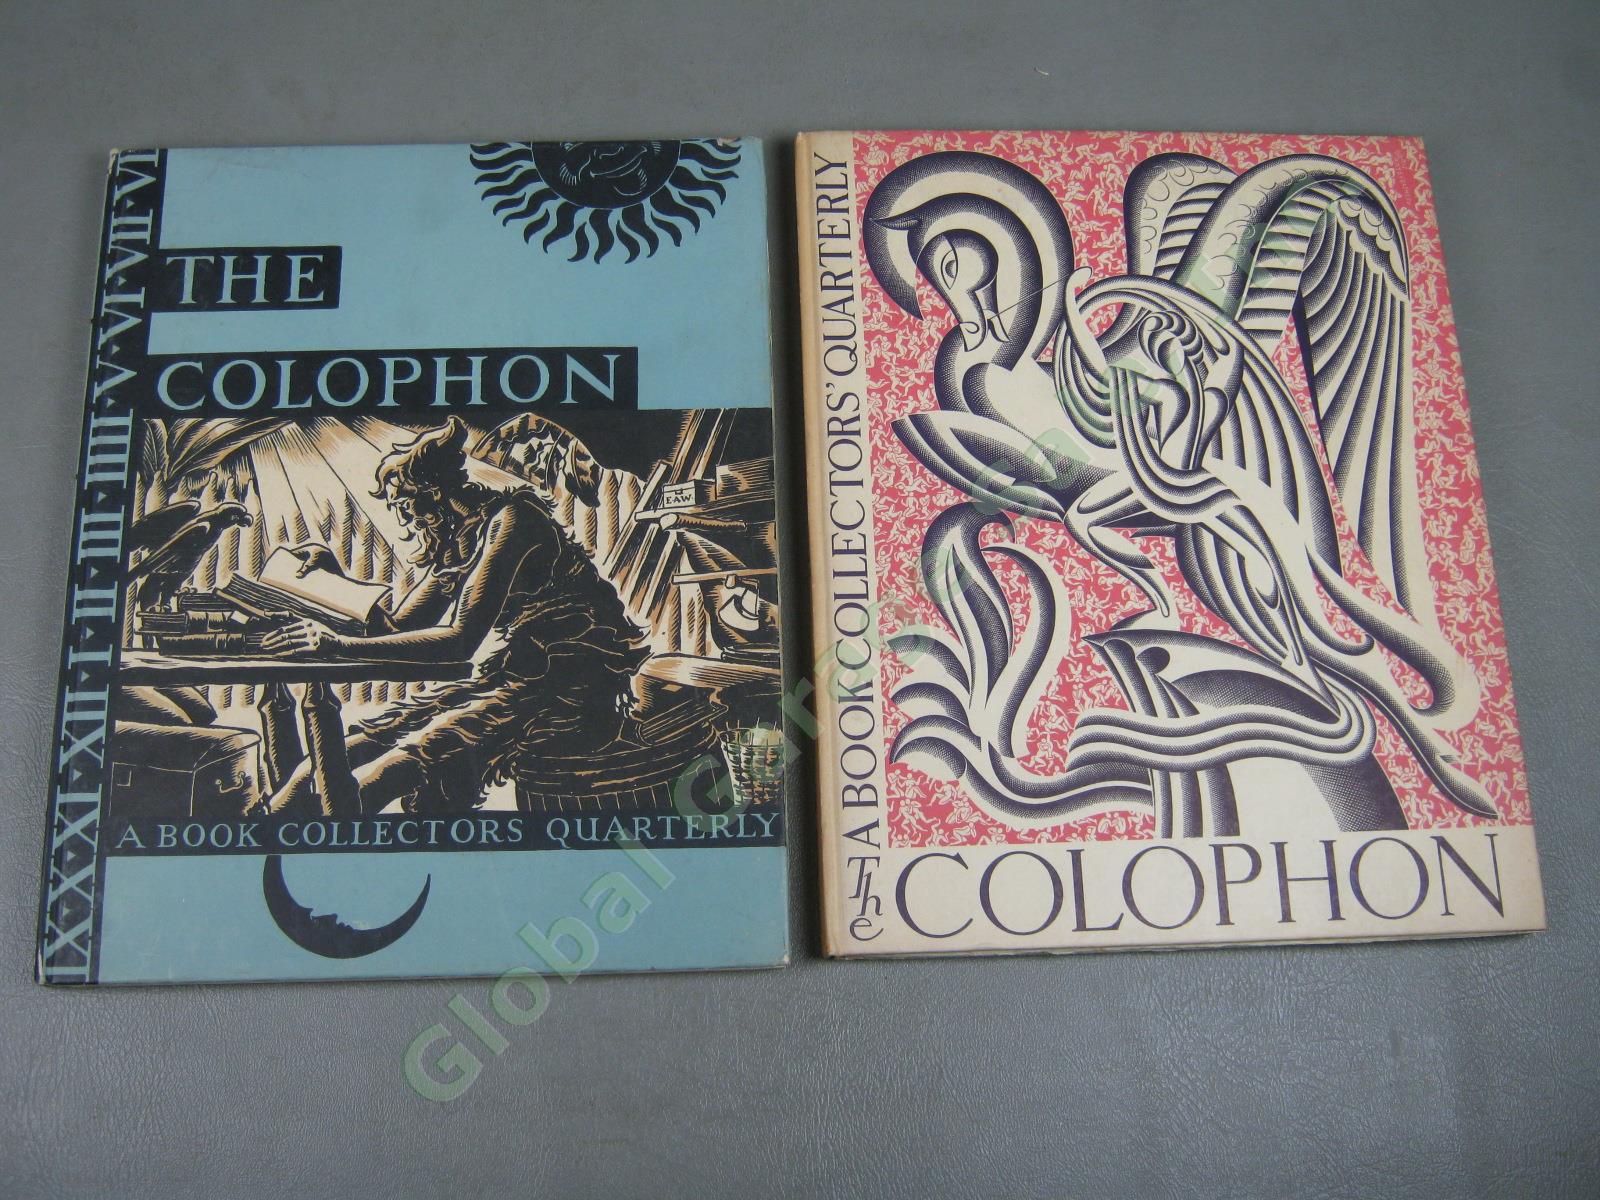 11 Vtg The Colophon Book Collector Quarterly 1930-32 Part 1 2 3 4 6 8 9 10 11 NR 23